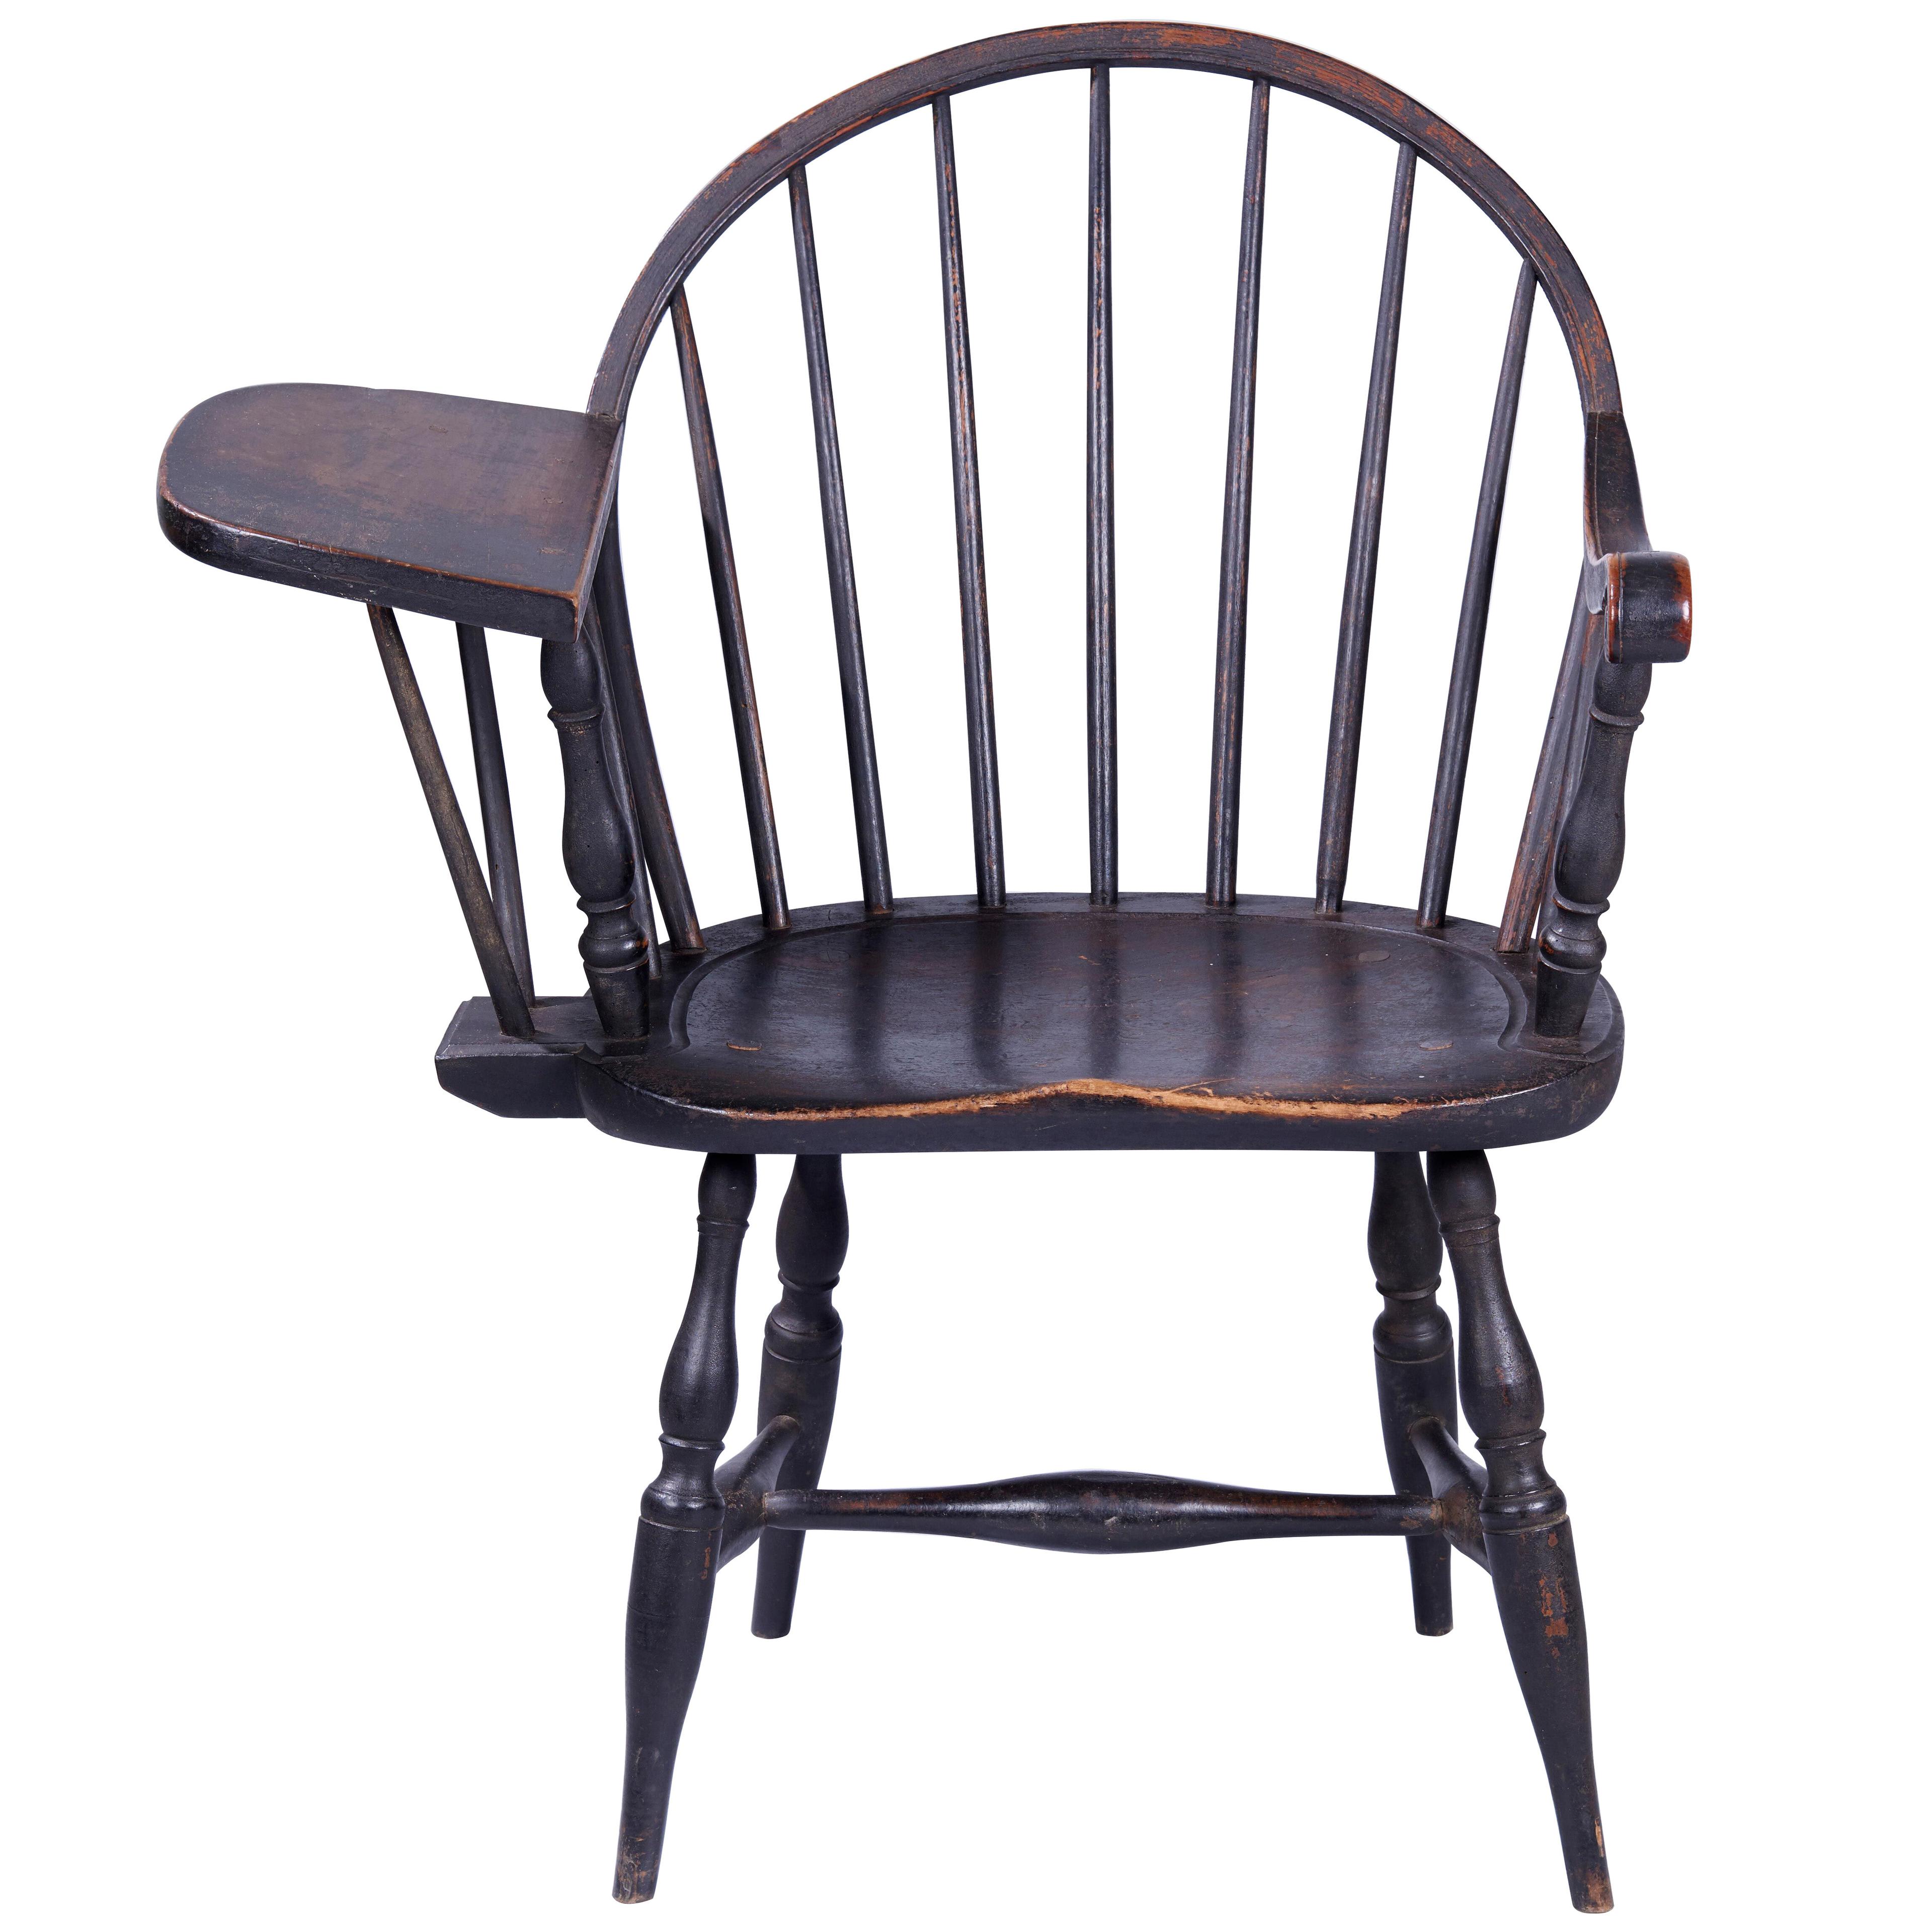 Southern Writing Arm Windsor Chair